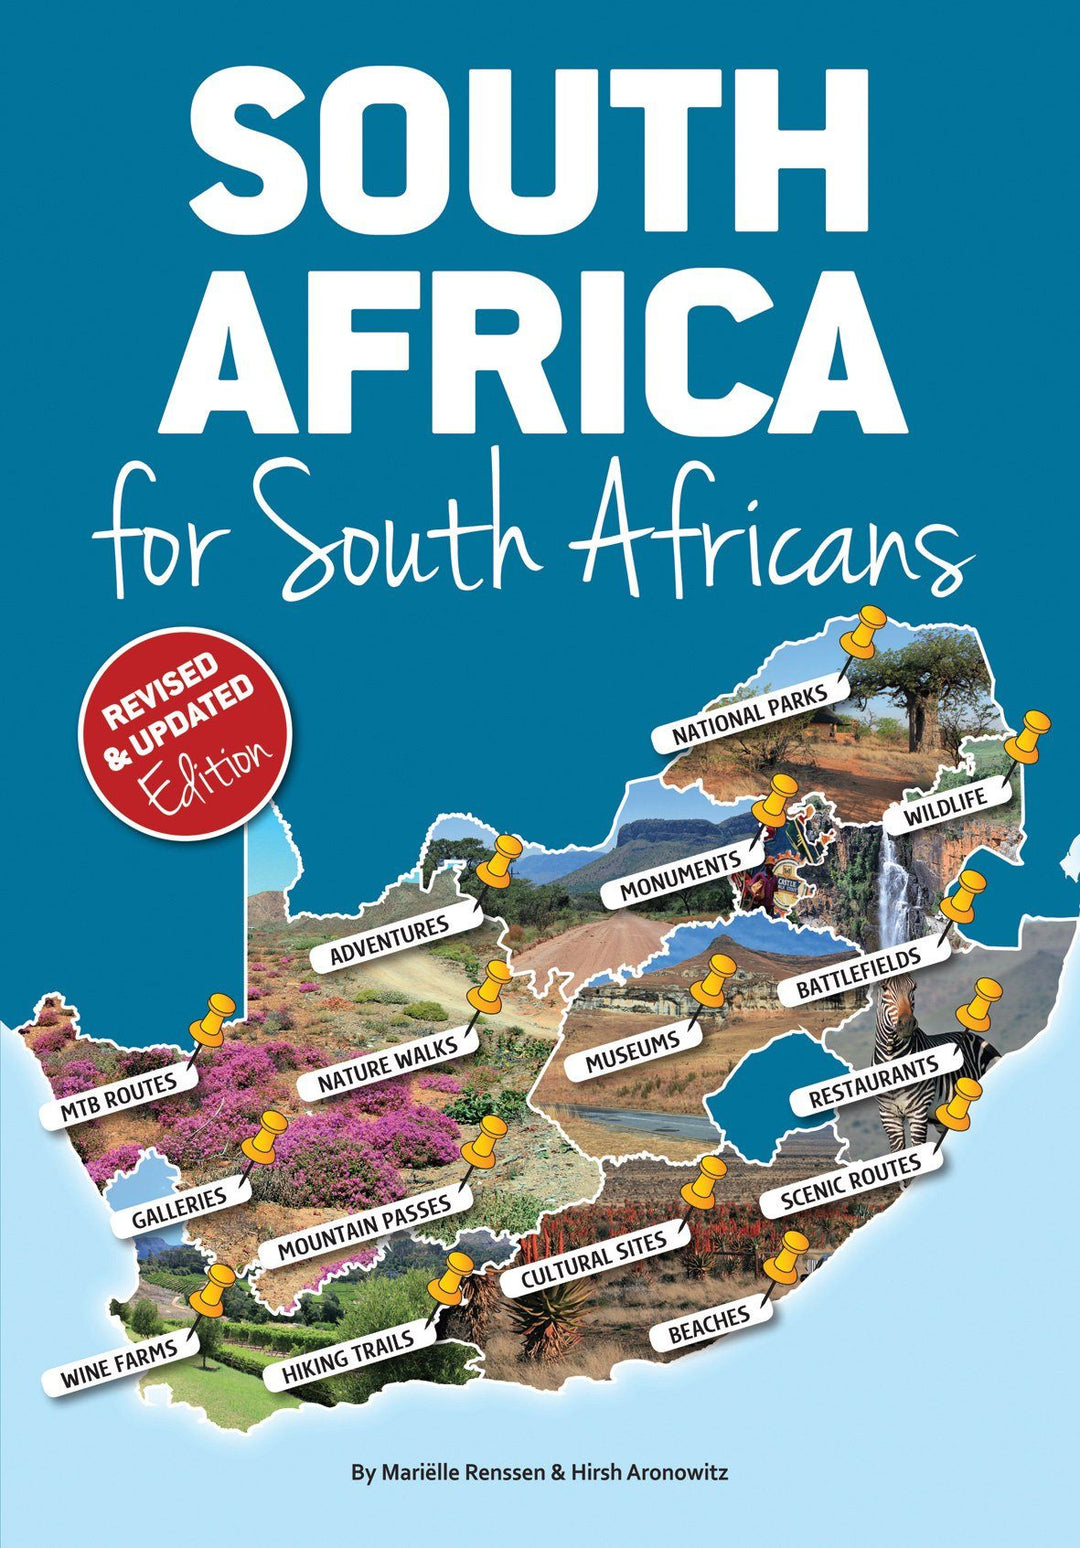 South Africa for South Africans (anglais) | MapStudio guide de voyage MapStudio 